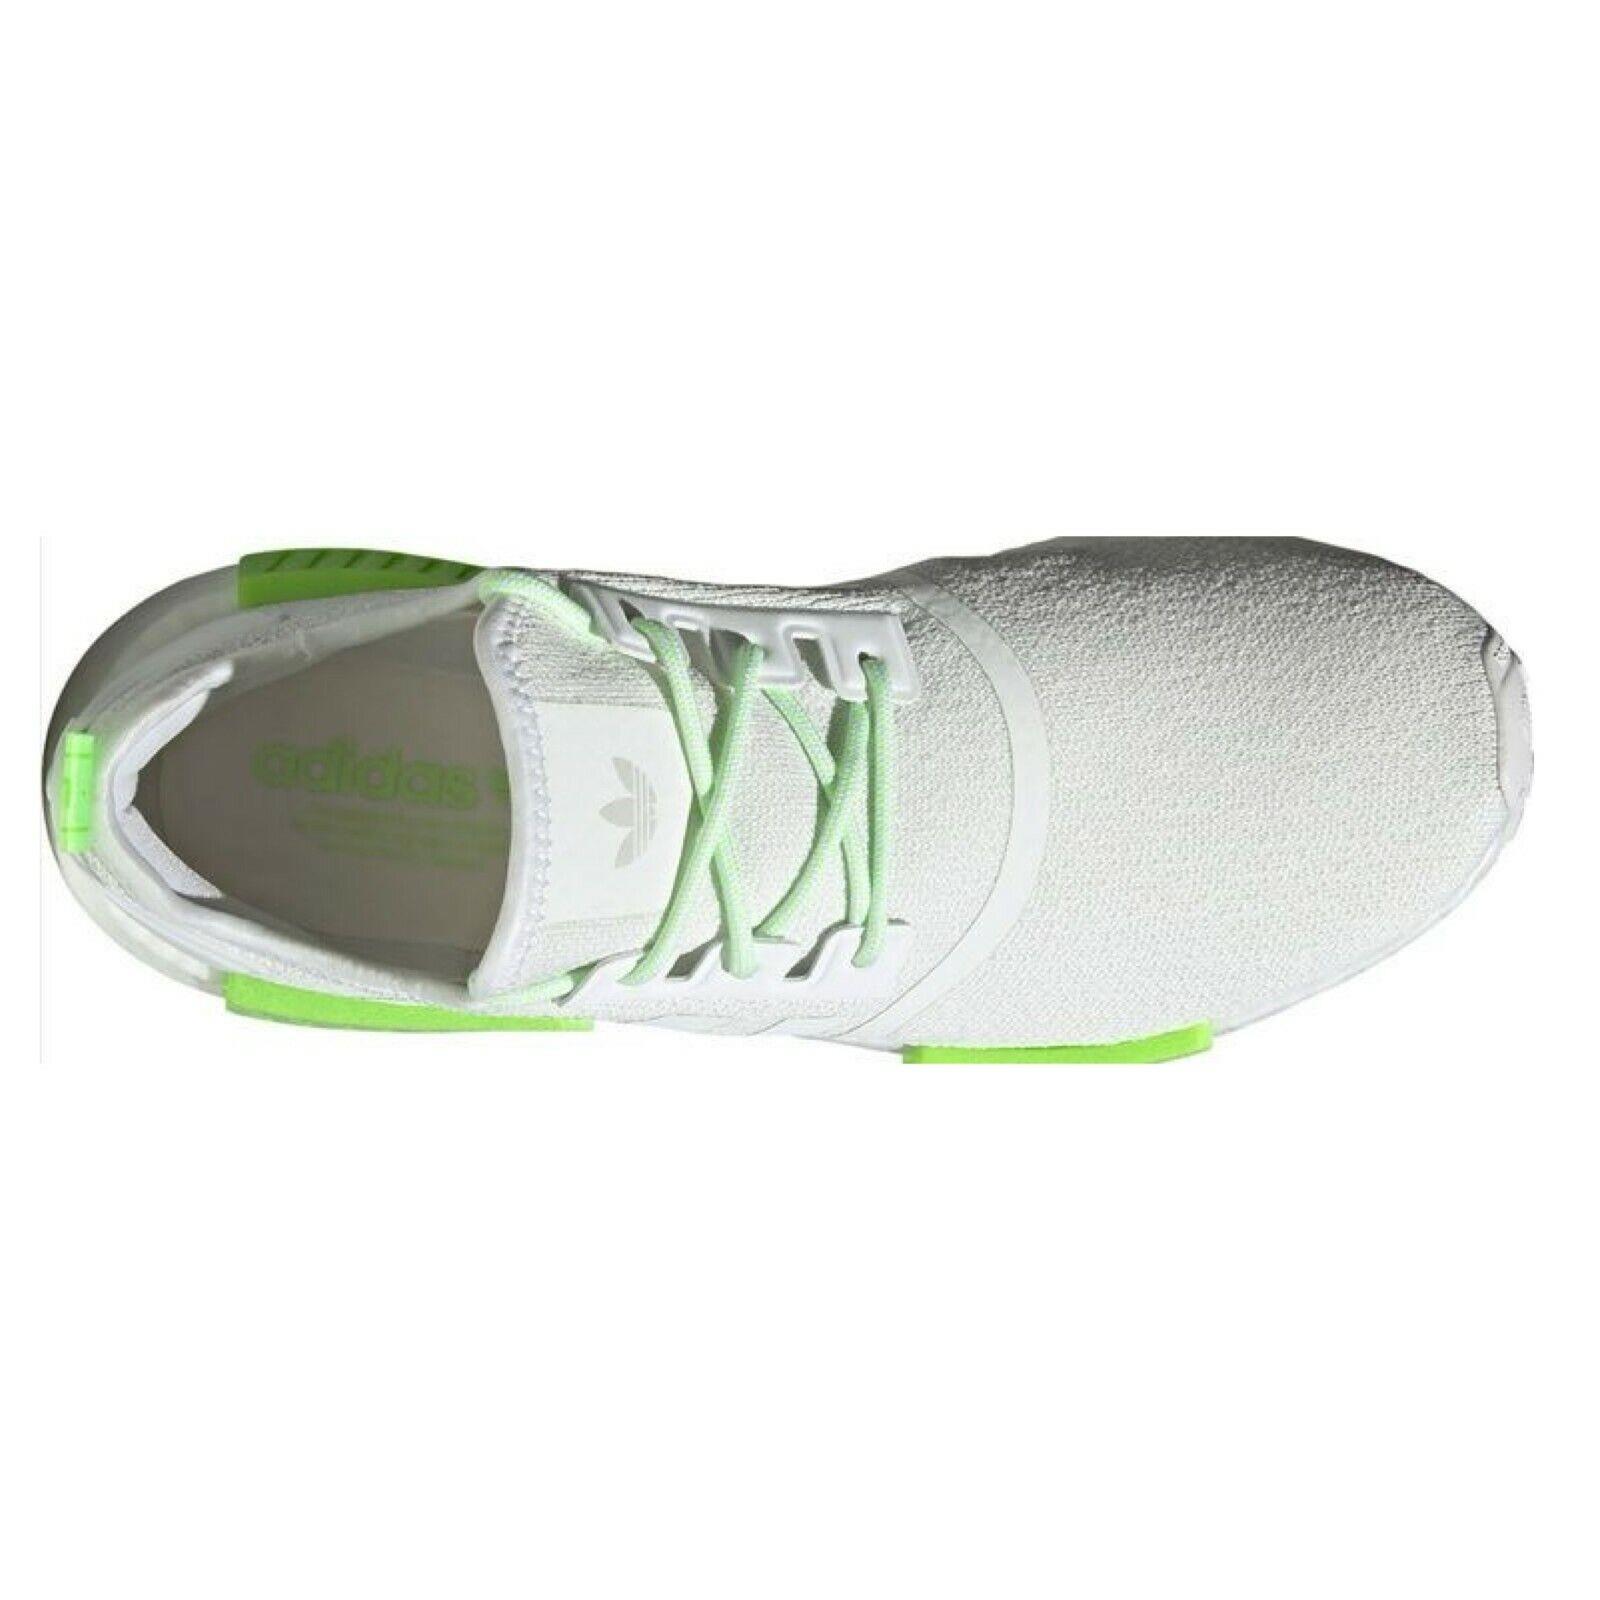 Adidas shoes NMD - Gray , GREY/NEON GREEN Manufacturer 10